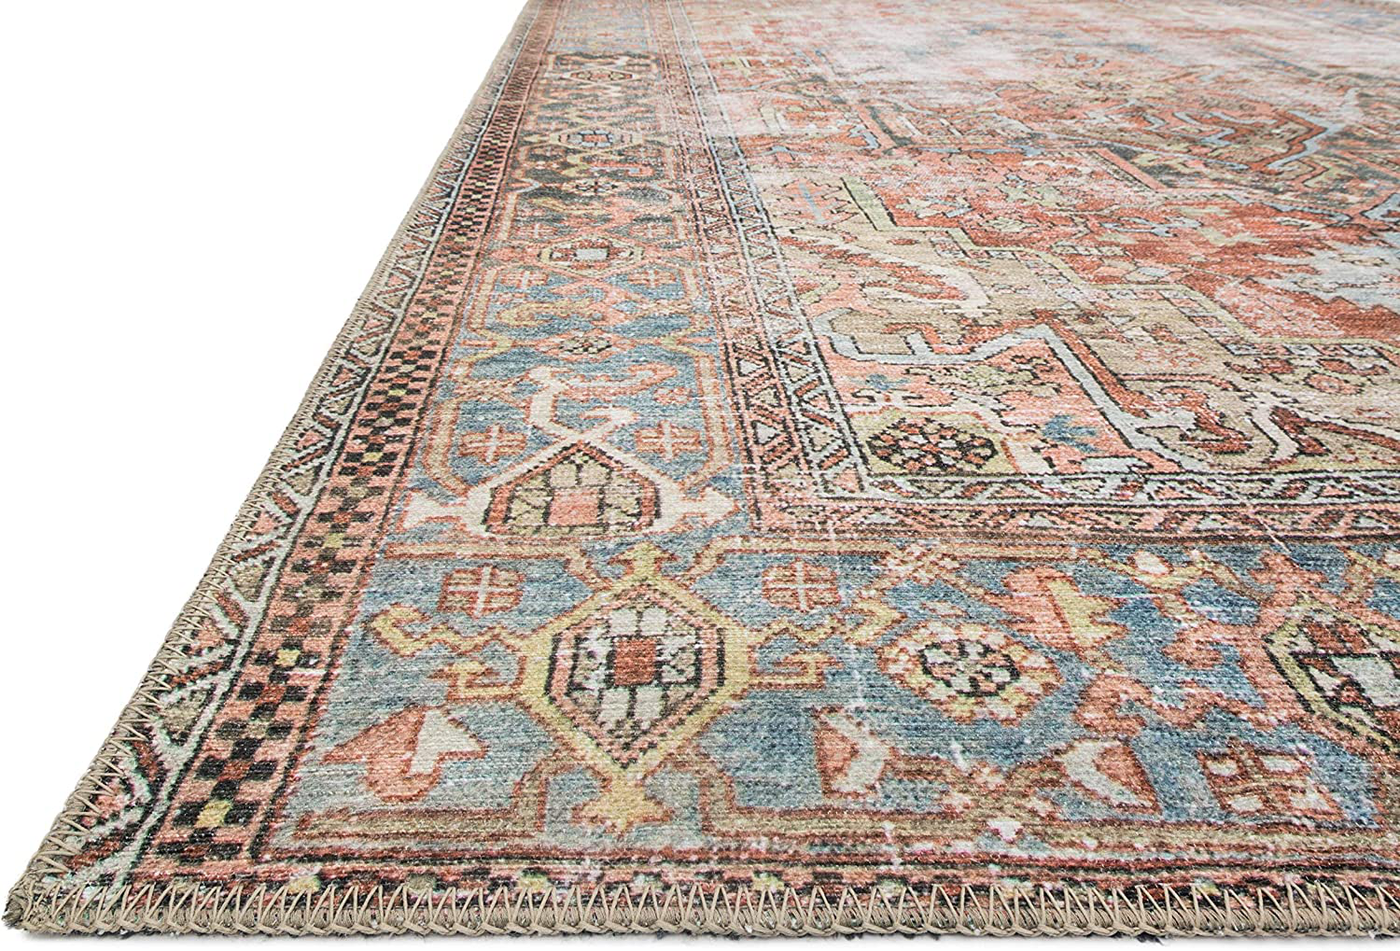 Loloi II Loren Collection Vintage Printed Persian Area Rug 1'-6" x 1'-6" Square Swatch Sand/Multi